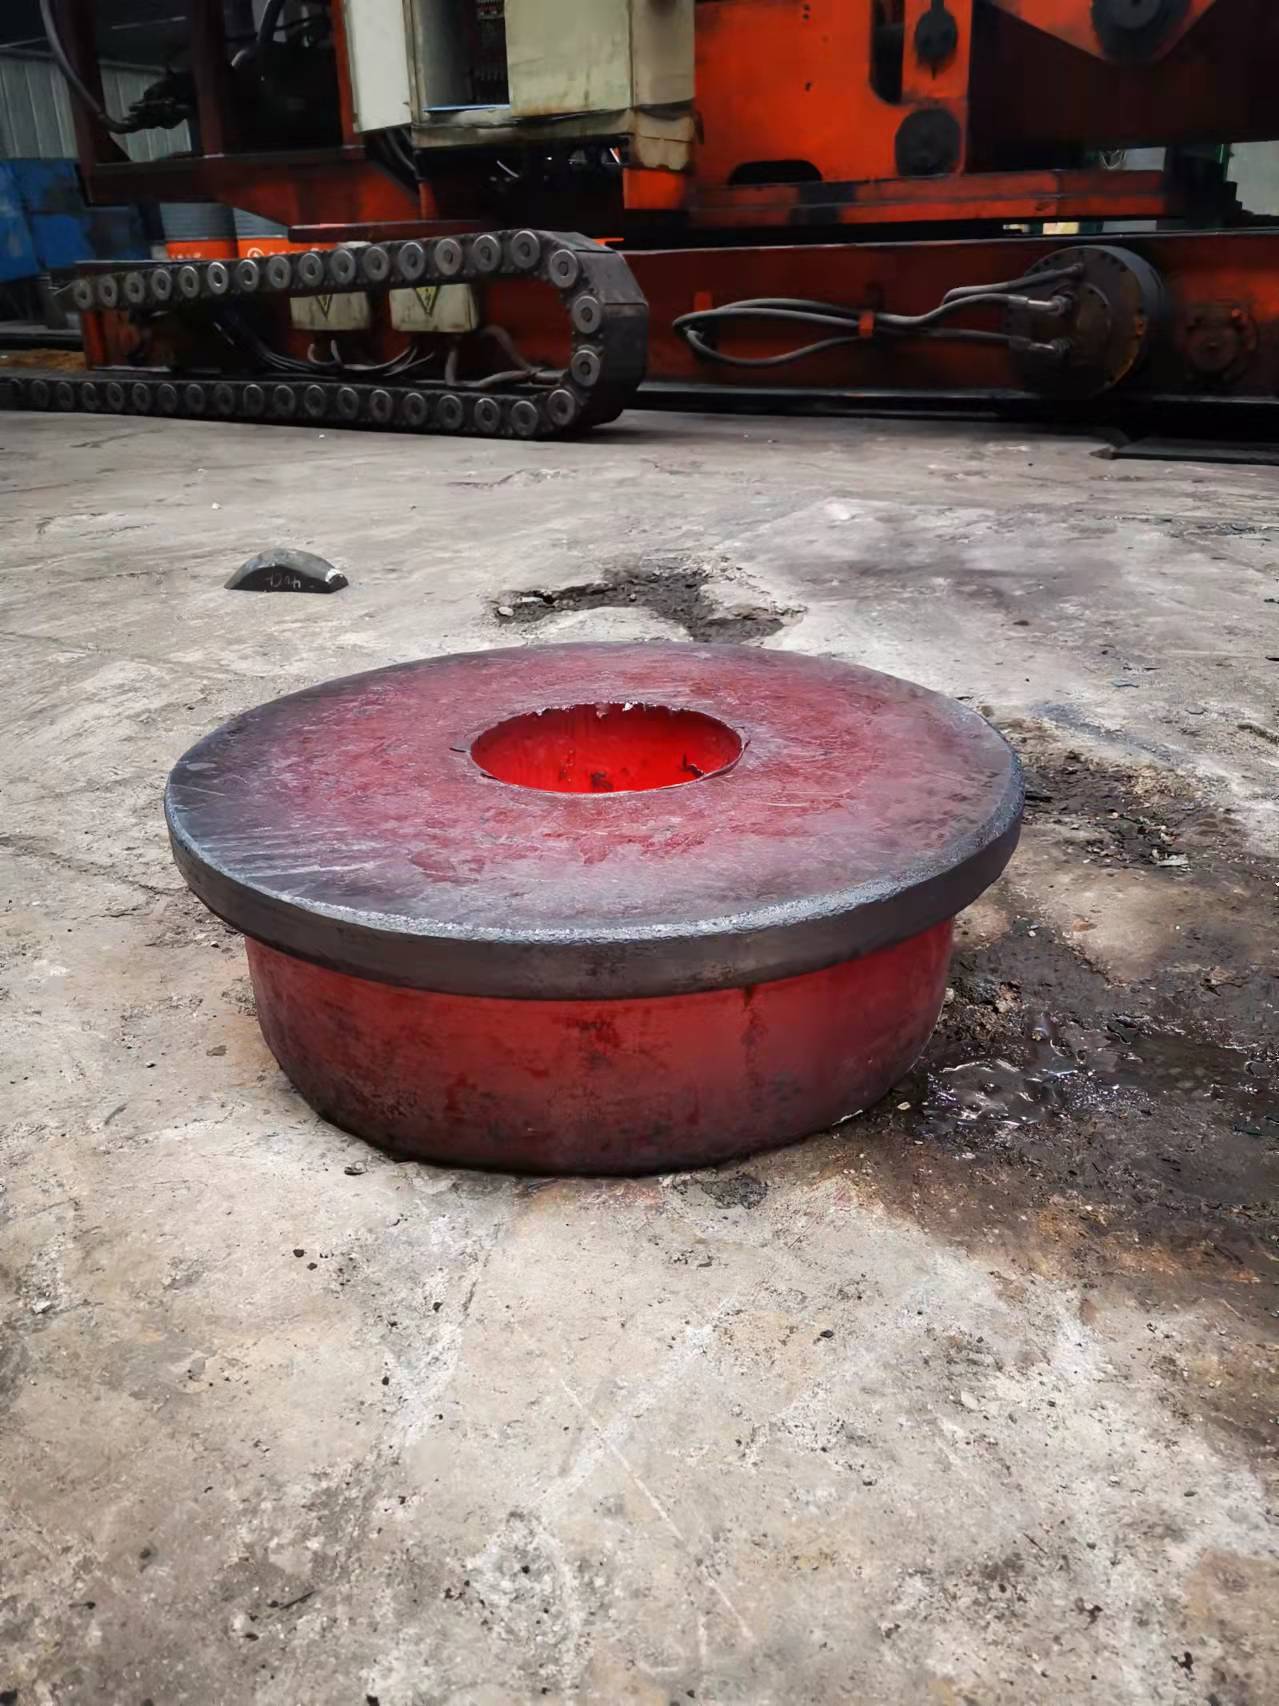 Why do large forgings undergo heat treatment after forging